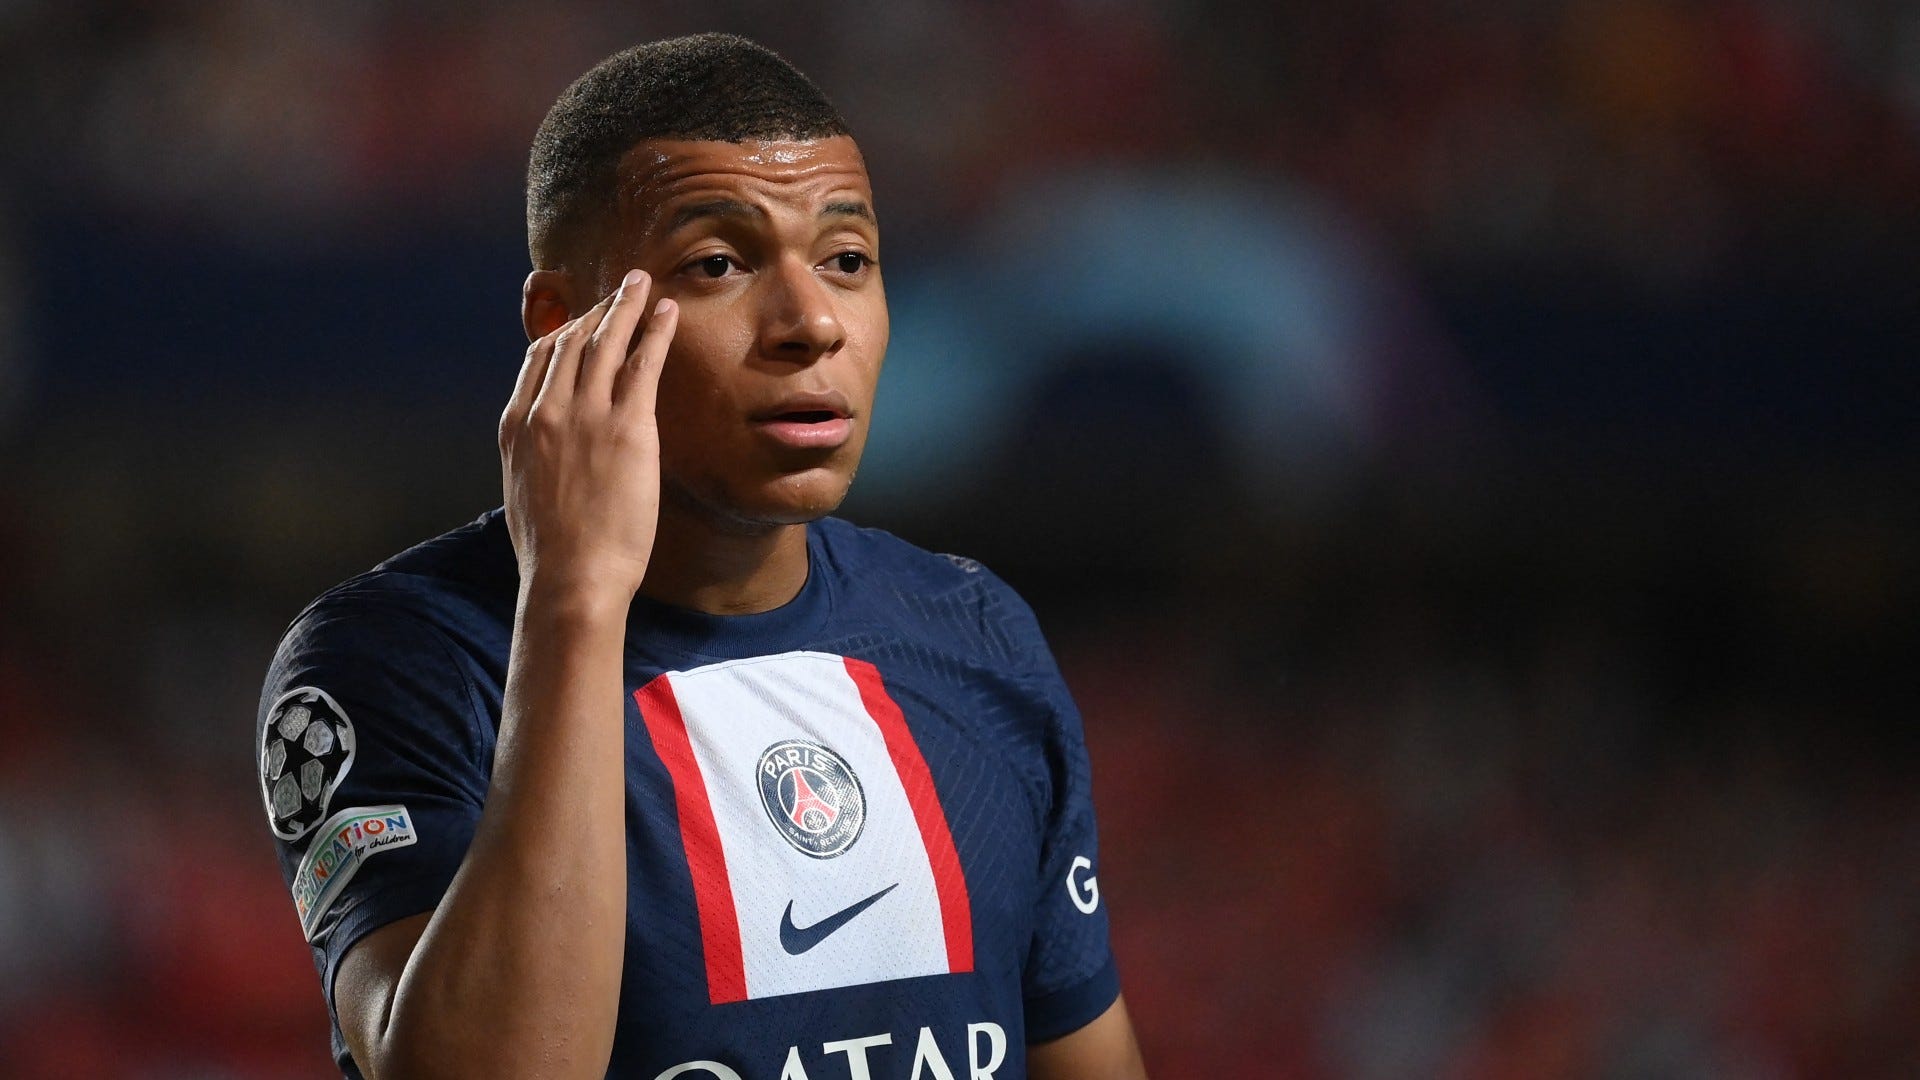 Mbappe Wants To Leave Psg In January Window As Transfer Door Opened To Real Madrid Liverpool Goal Com